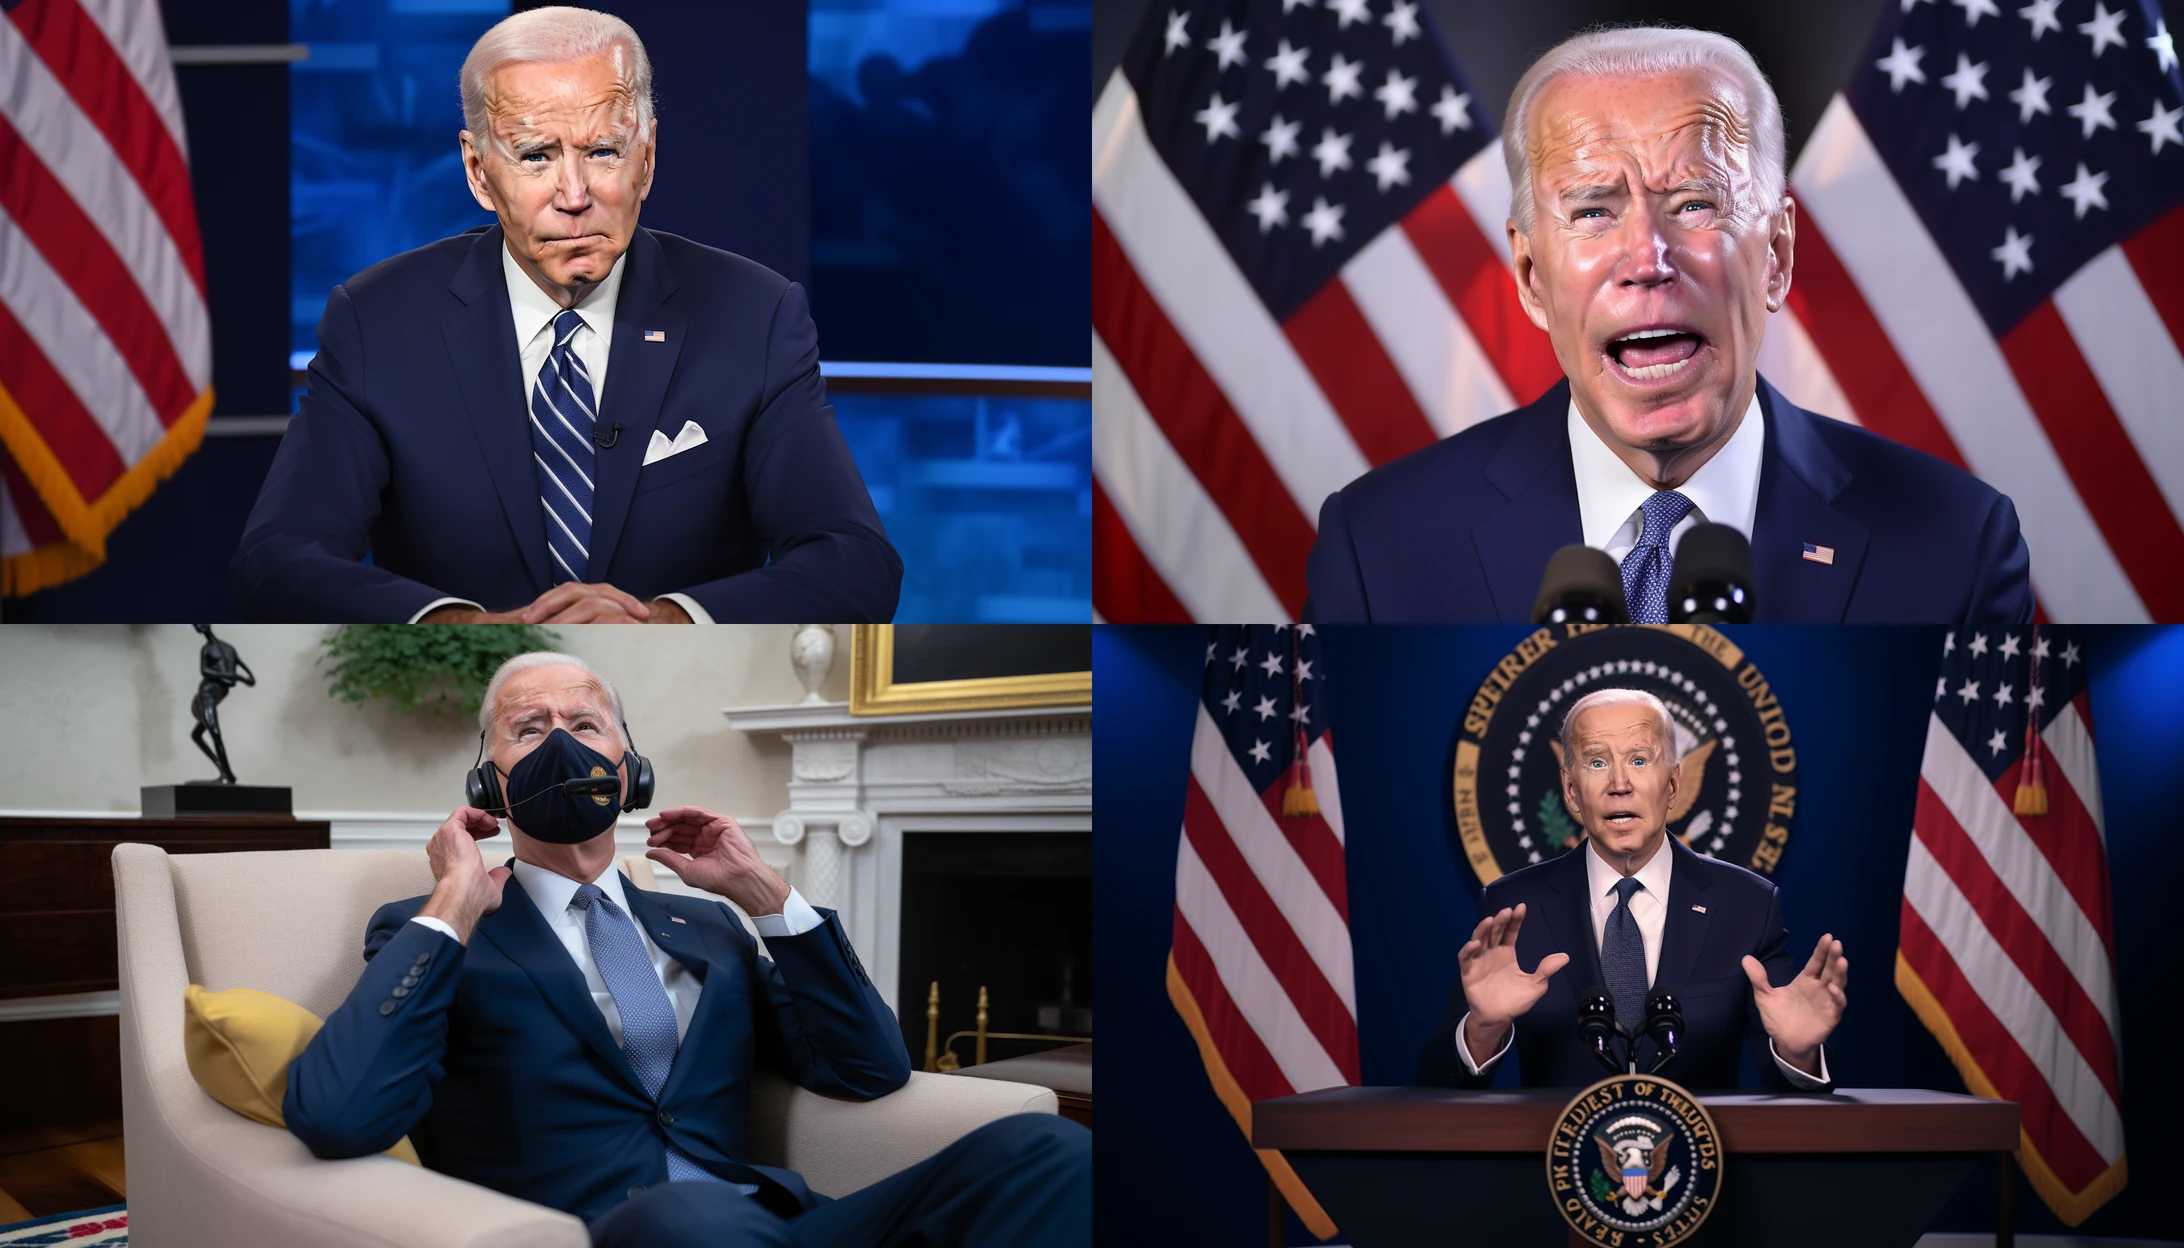 A snapshot of President Joe Biden addressing the nation, with a concerned expression on his face, photographed using a Sony A7 III.